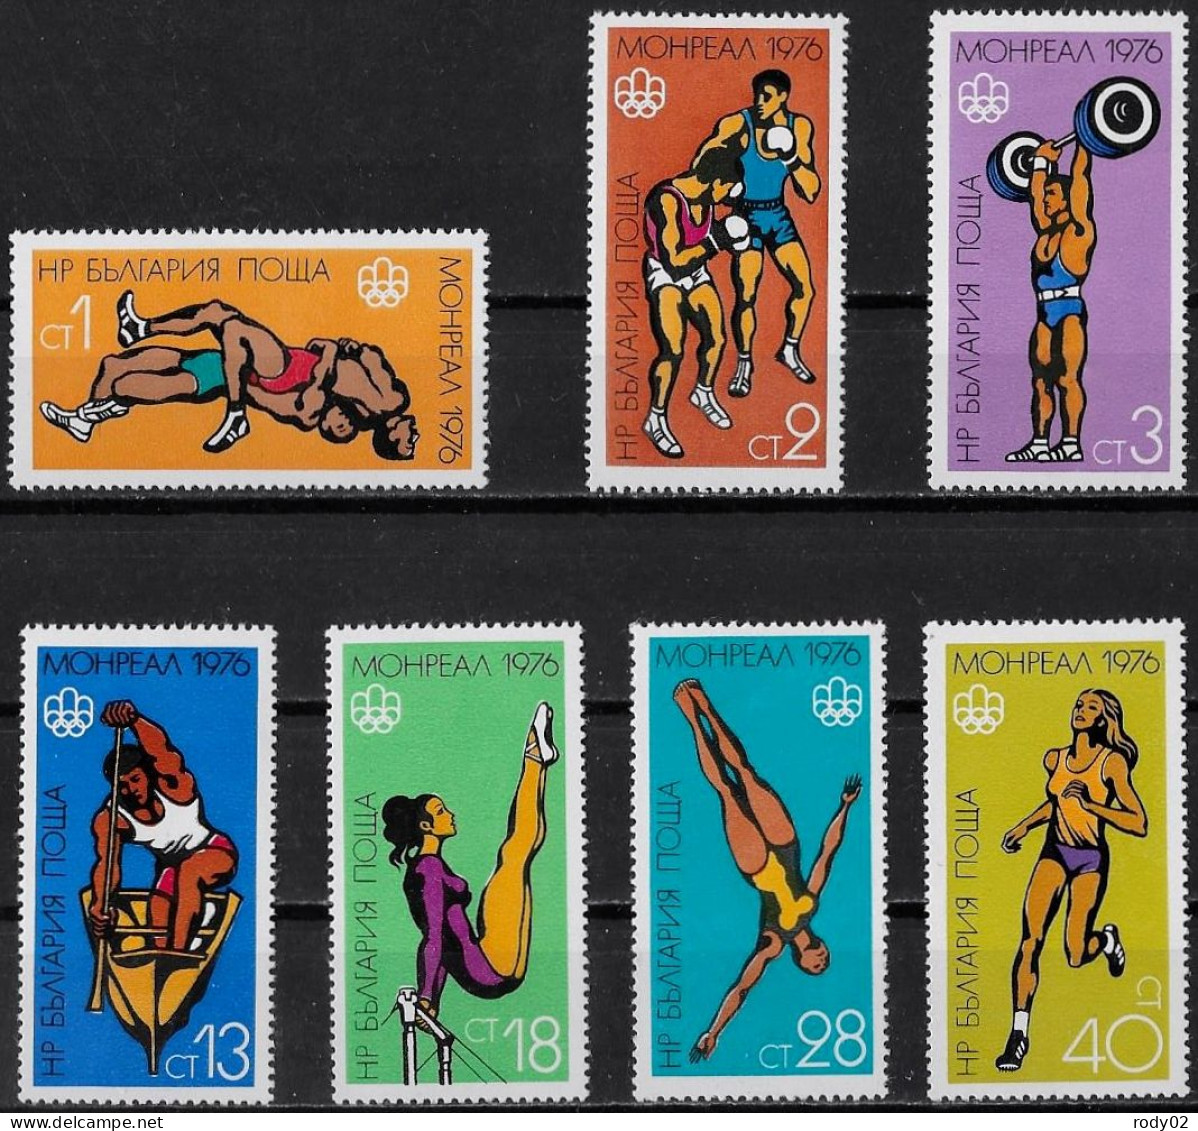 BULGARIE - JEUX OLYMPIQUES DE MONTREAL EN 1976 - N° 2215 A 2221 - NEUF** MNH - Summer 1976: Montreal